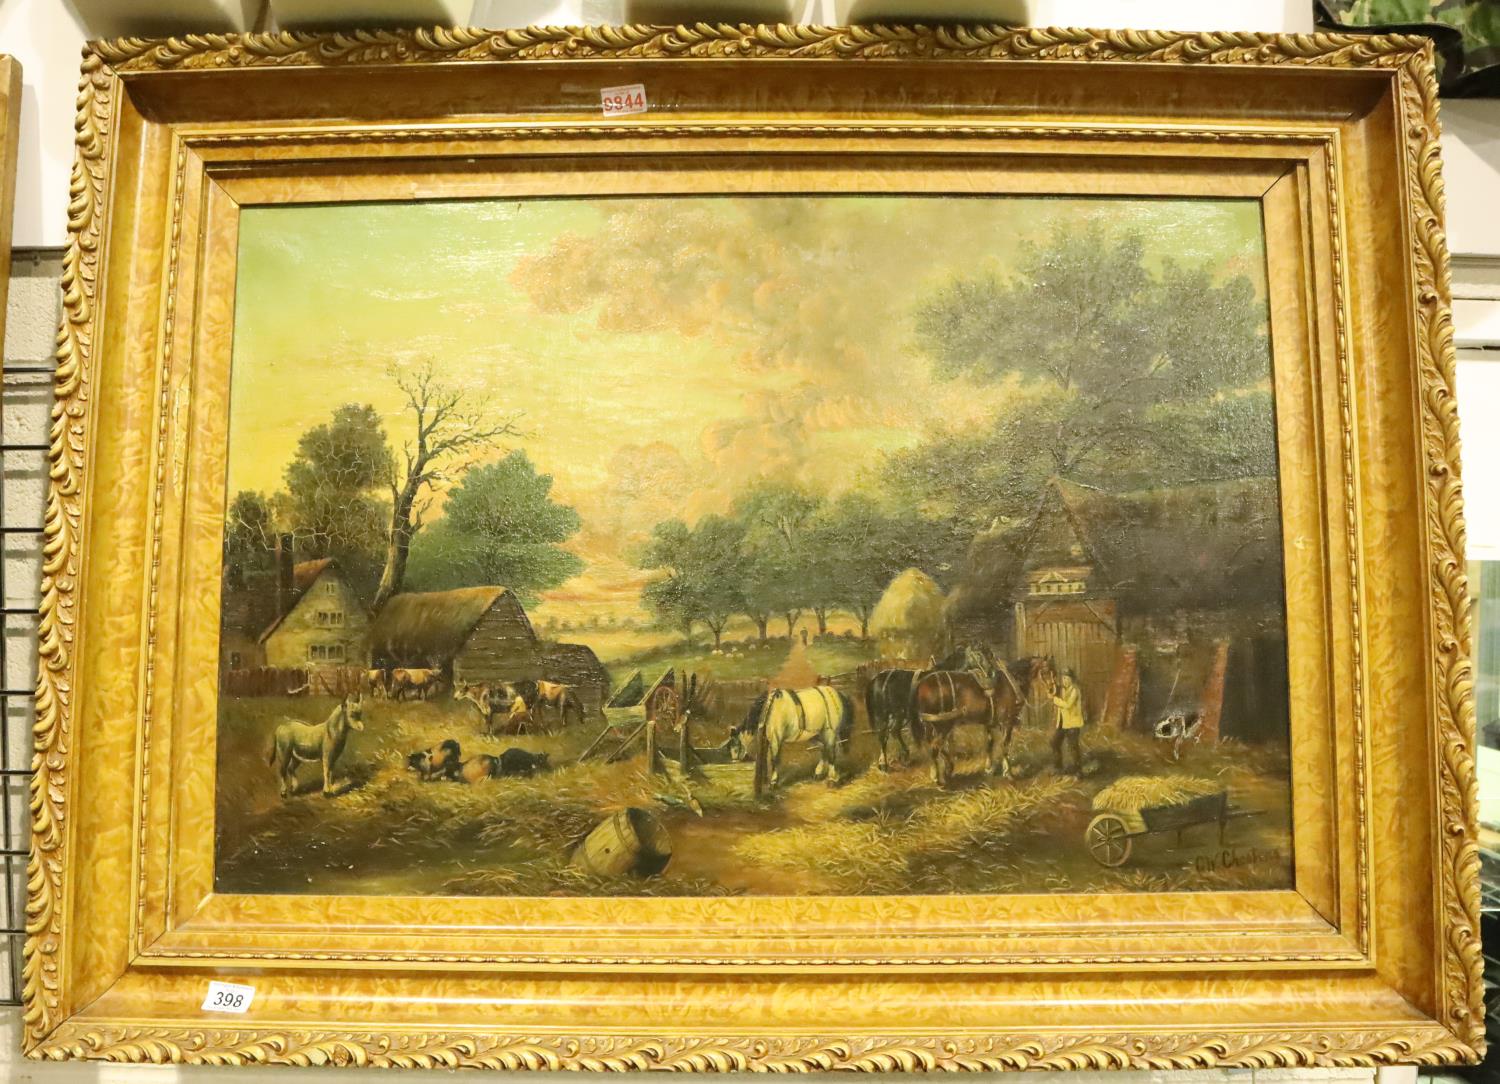 Chesters GW Chesters; 19th century oil on canvas of a farmyard scene, signed by artist, 90 x 60 - Image 2 of 9